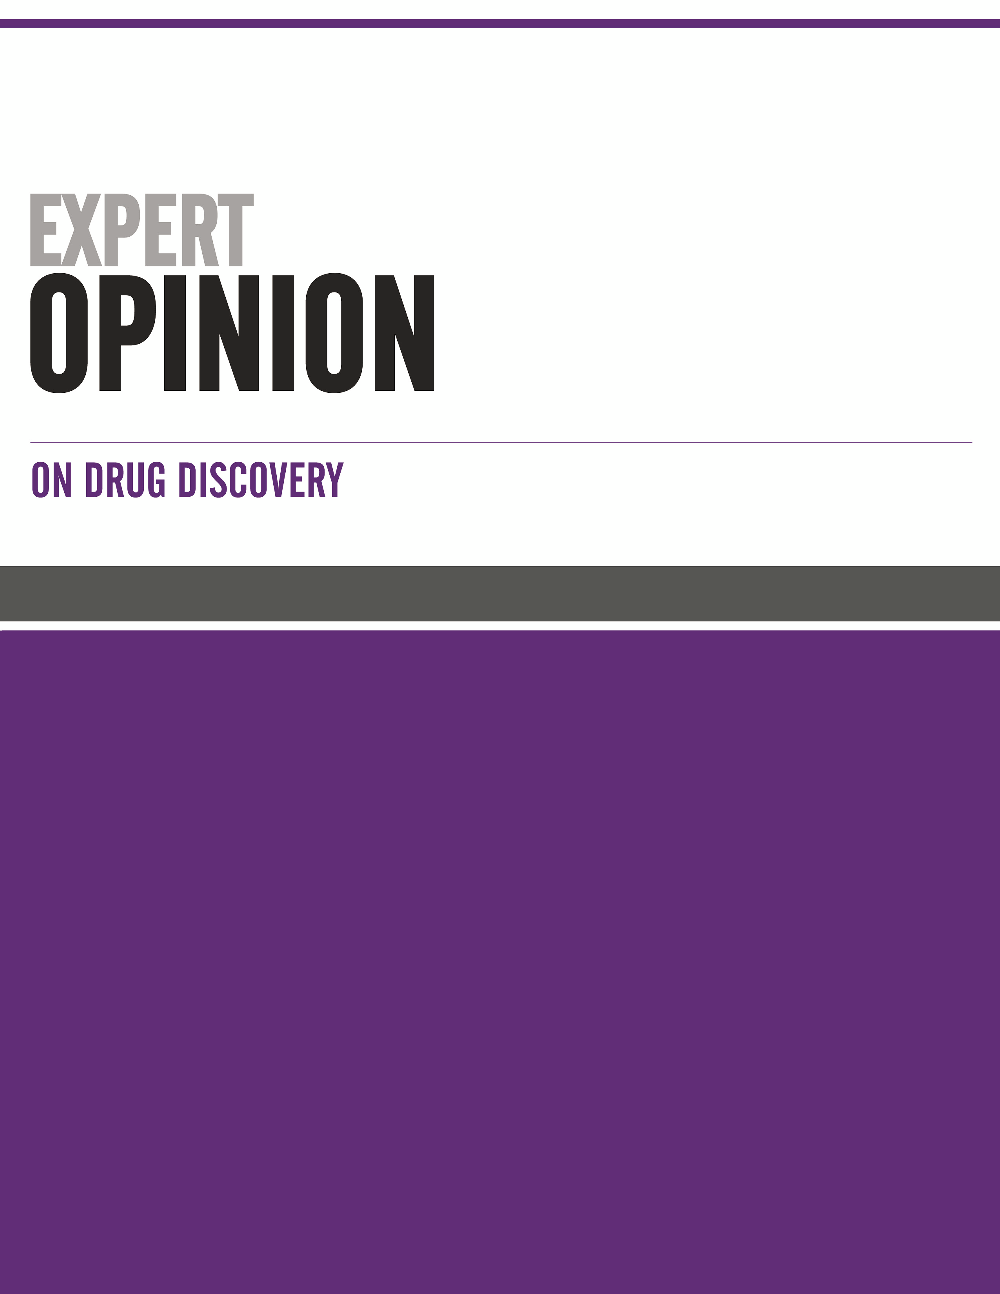 Expert Opinion on Investigational Drugs journal